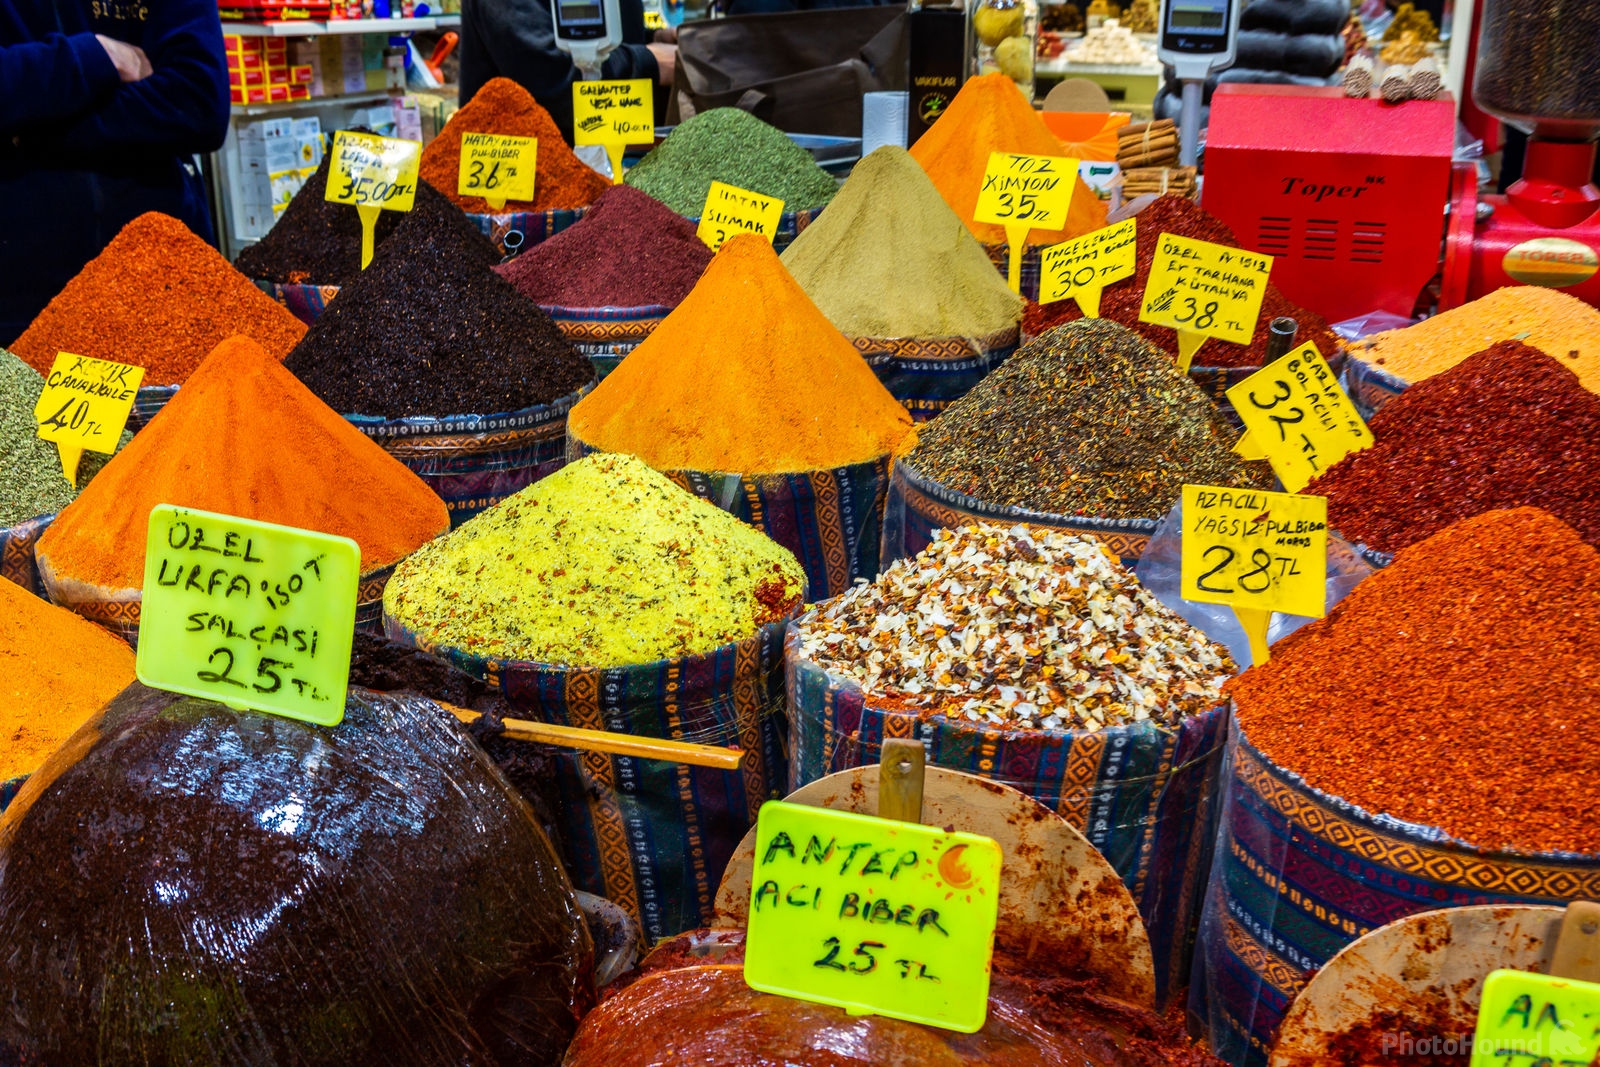 Image of Misir market by Dancho Hristov